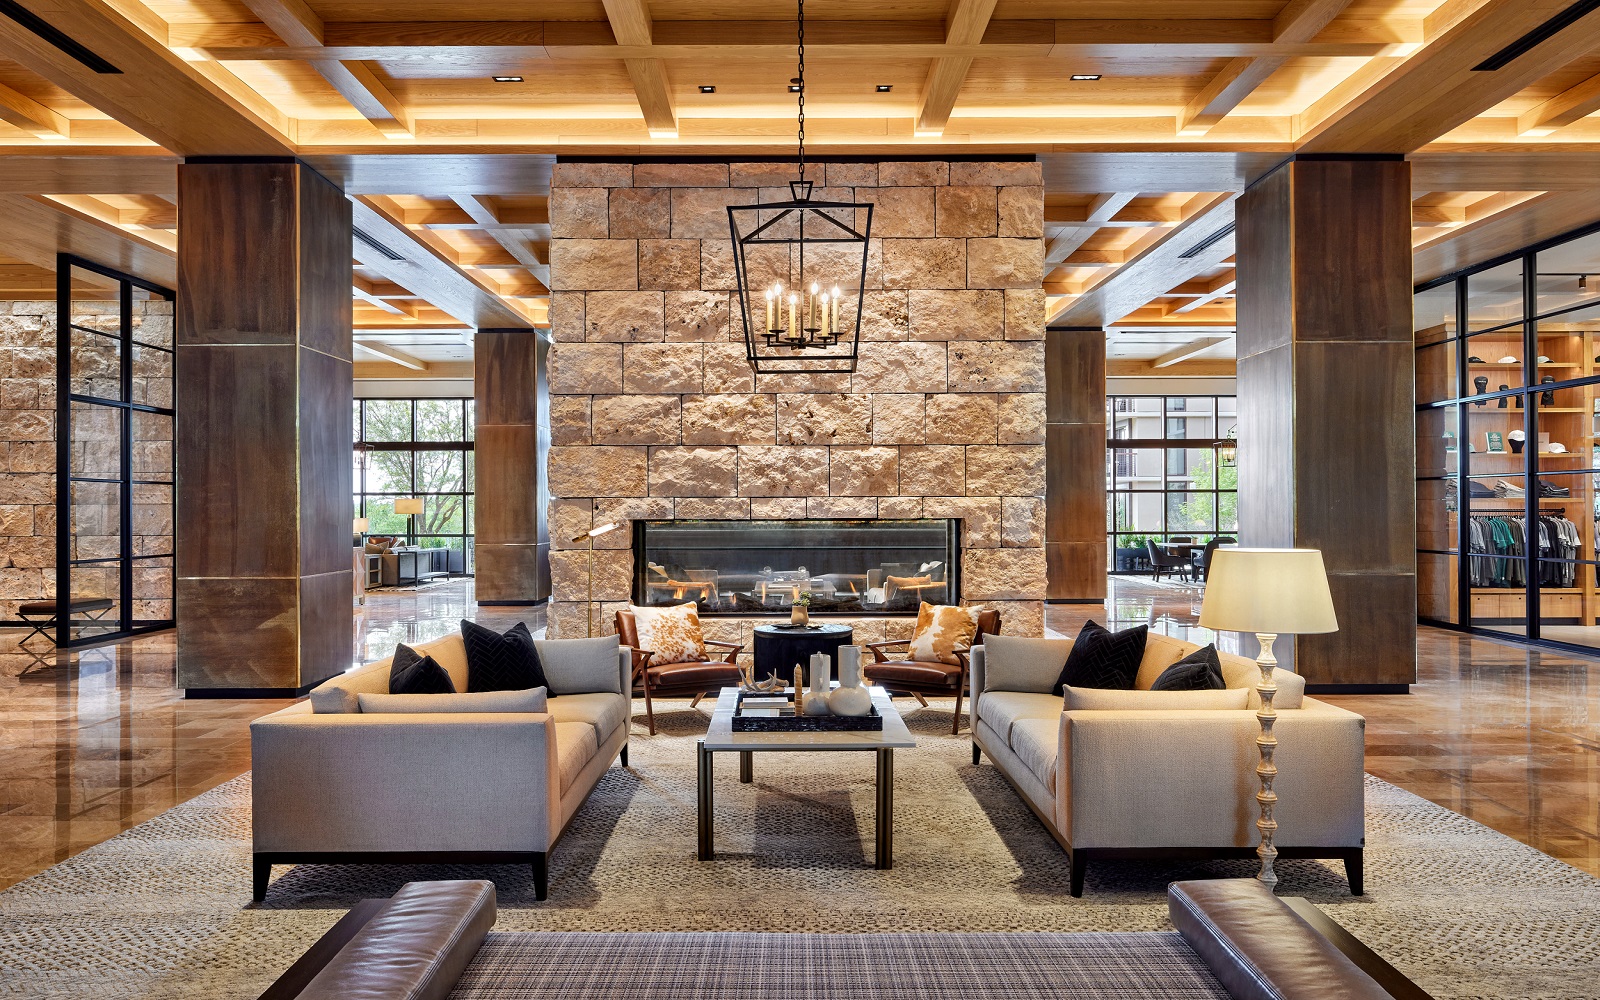 central stone fireplace with seating below ranch style wooden beams in the lobby of Omni PGA Frisco Resort